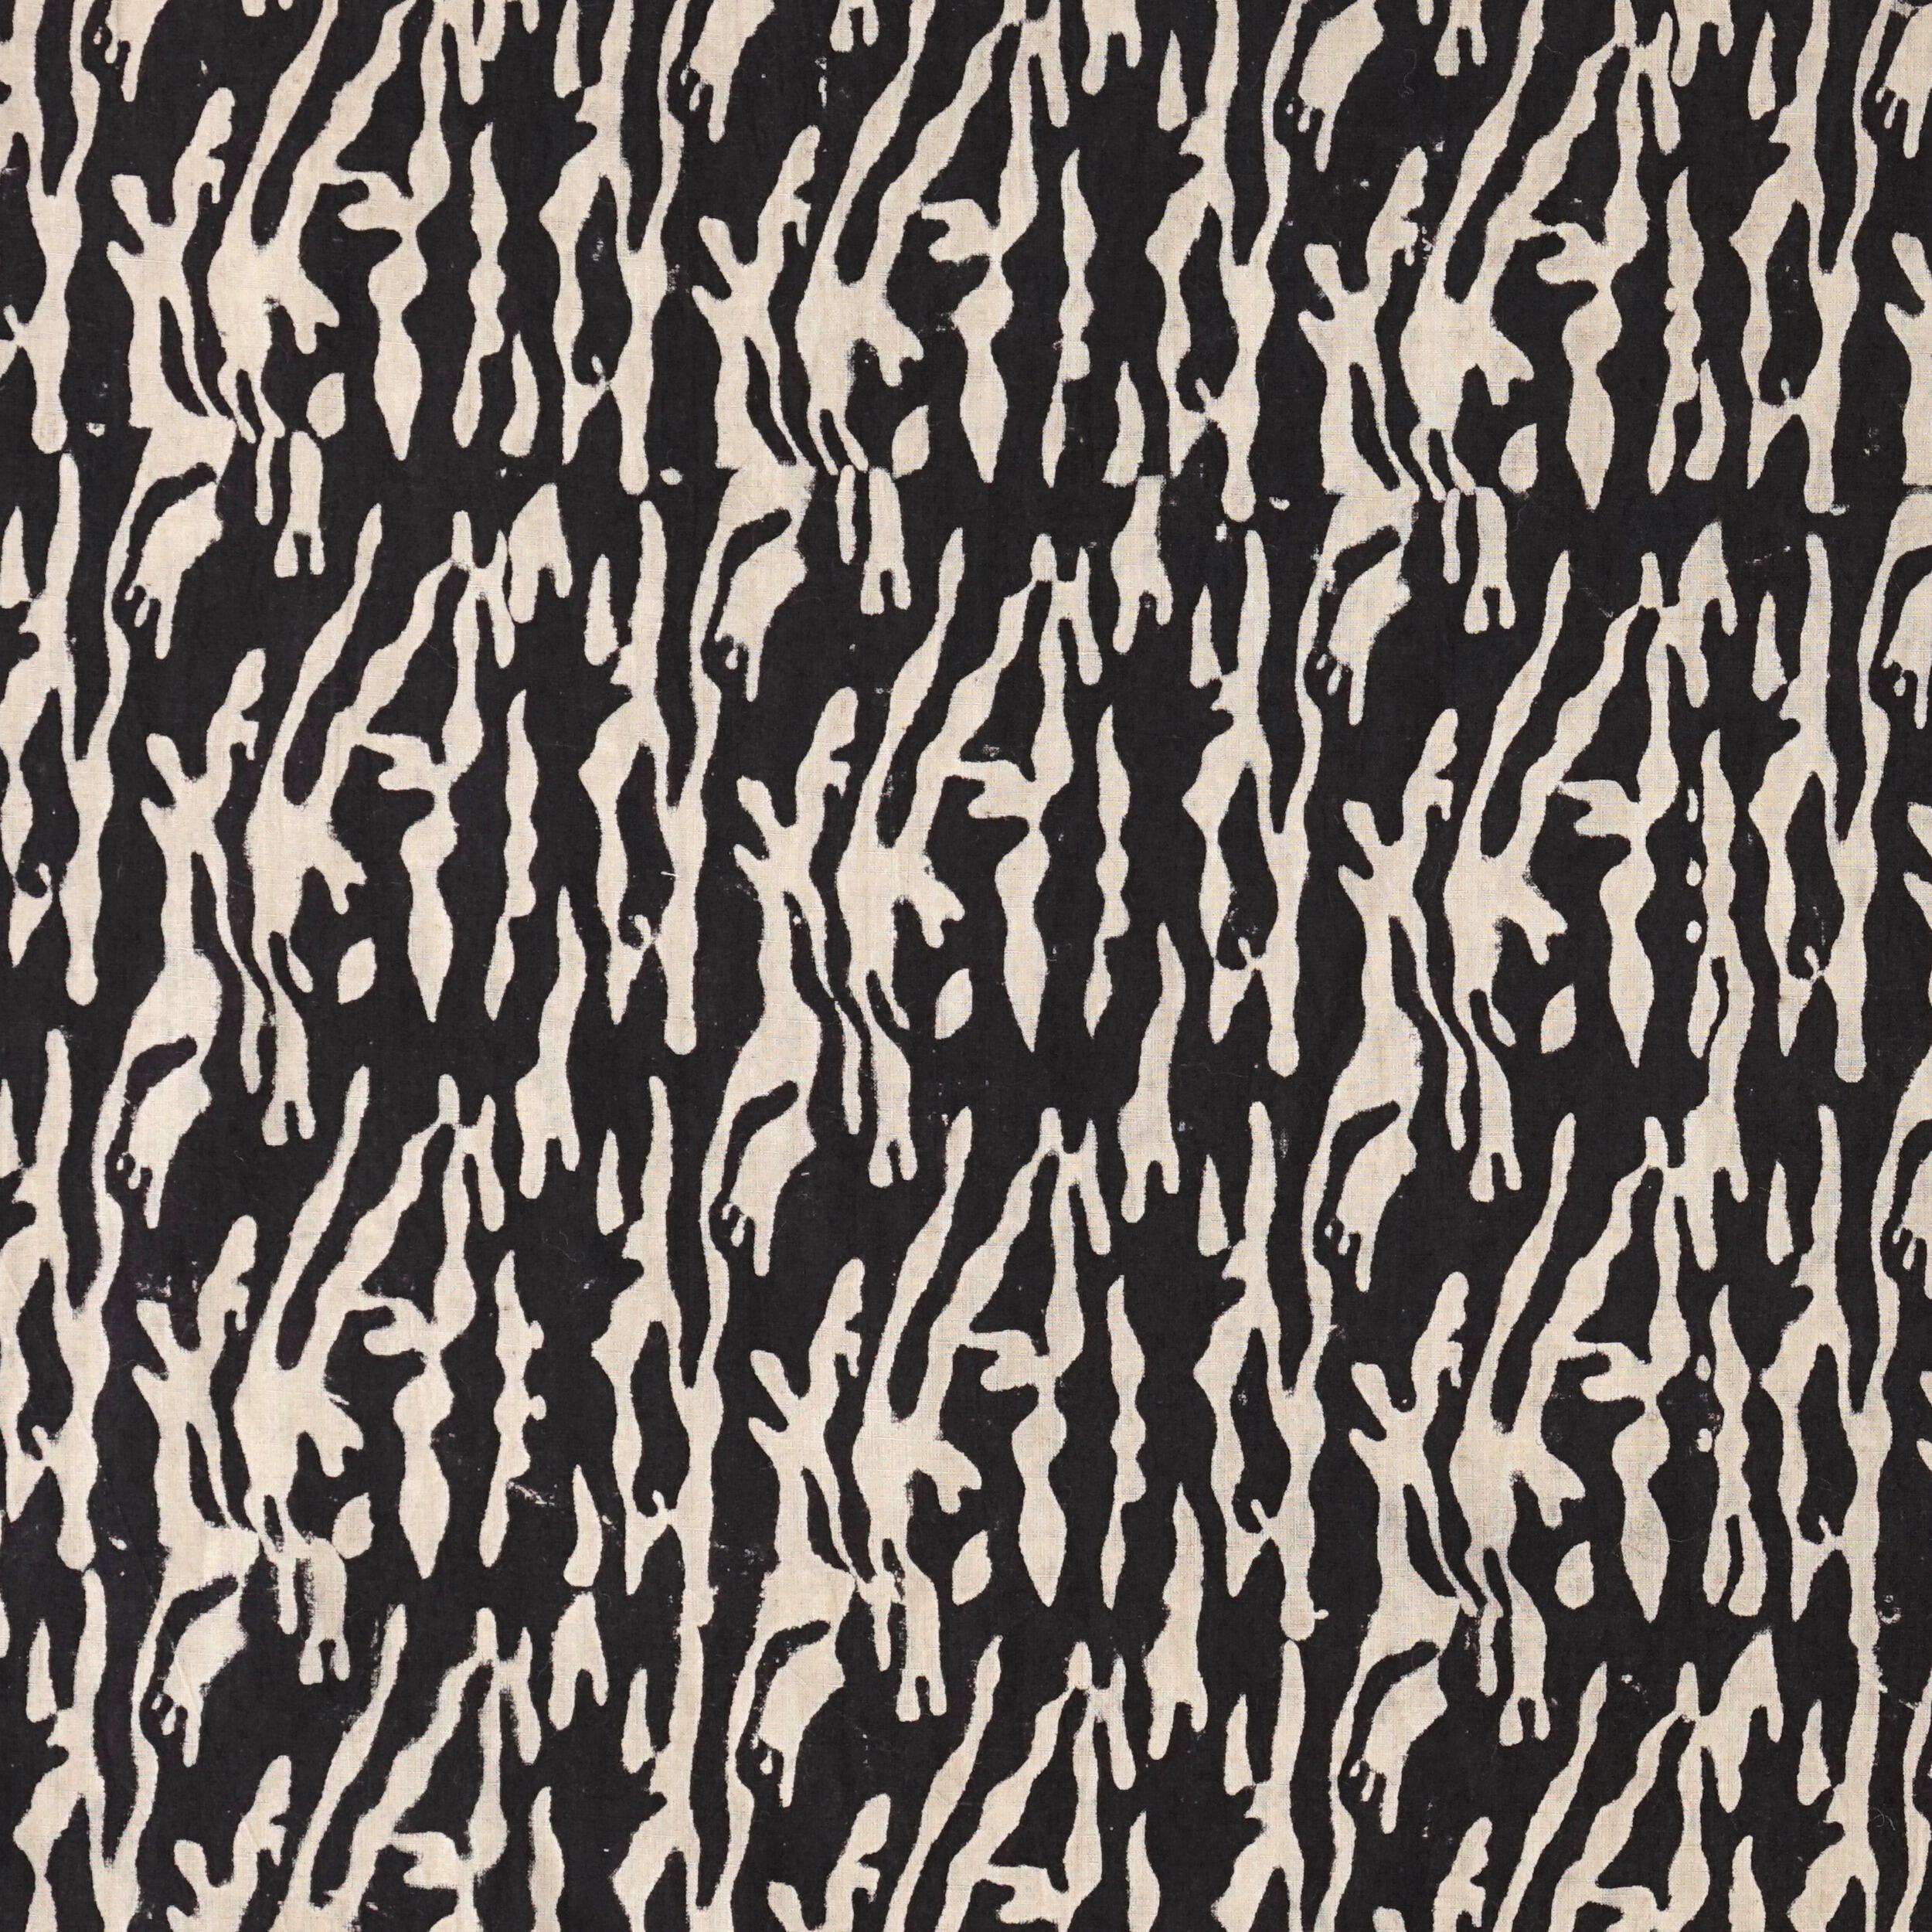 Indian Hand Woodblock-Printed Cotton - Tiger Print - Printed With Black Iron Rust Dye - Flat